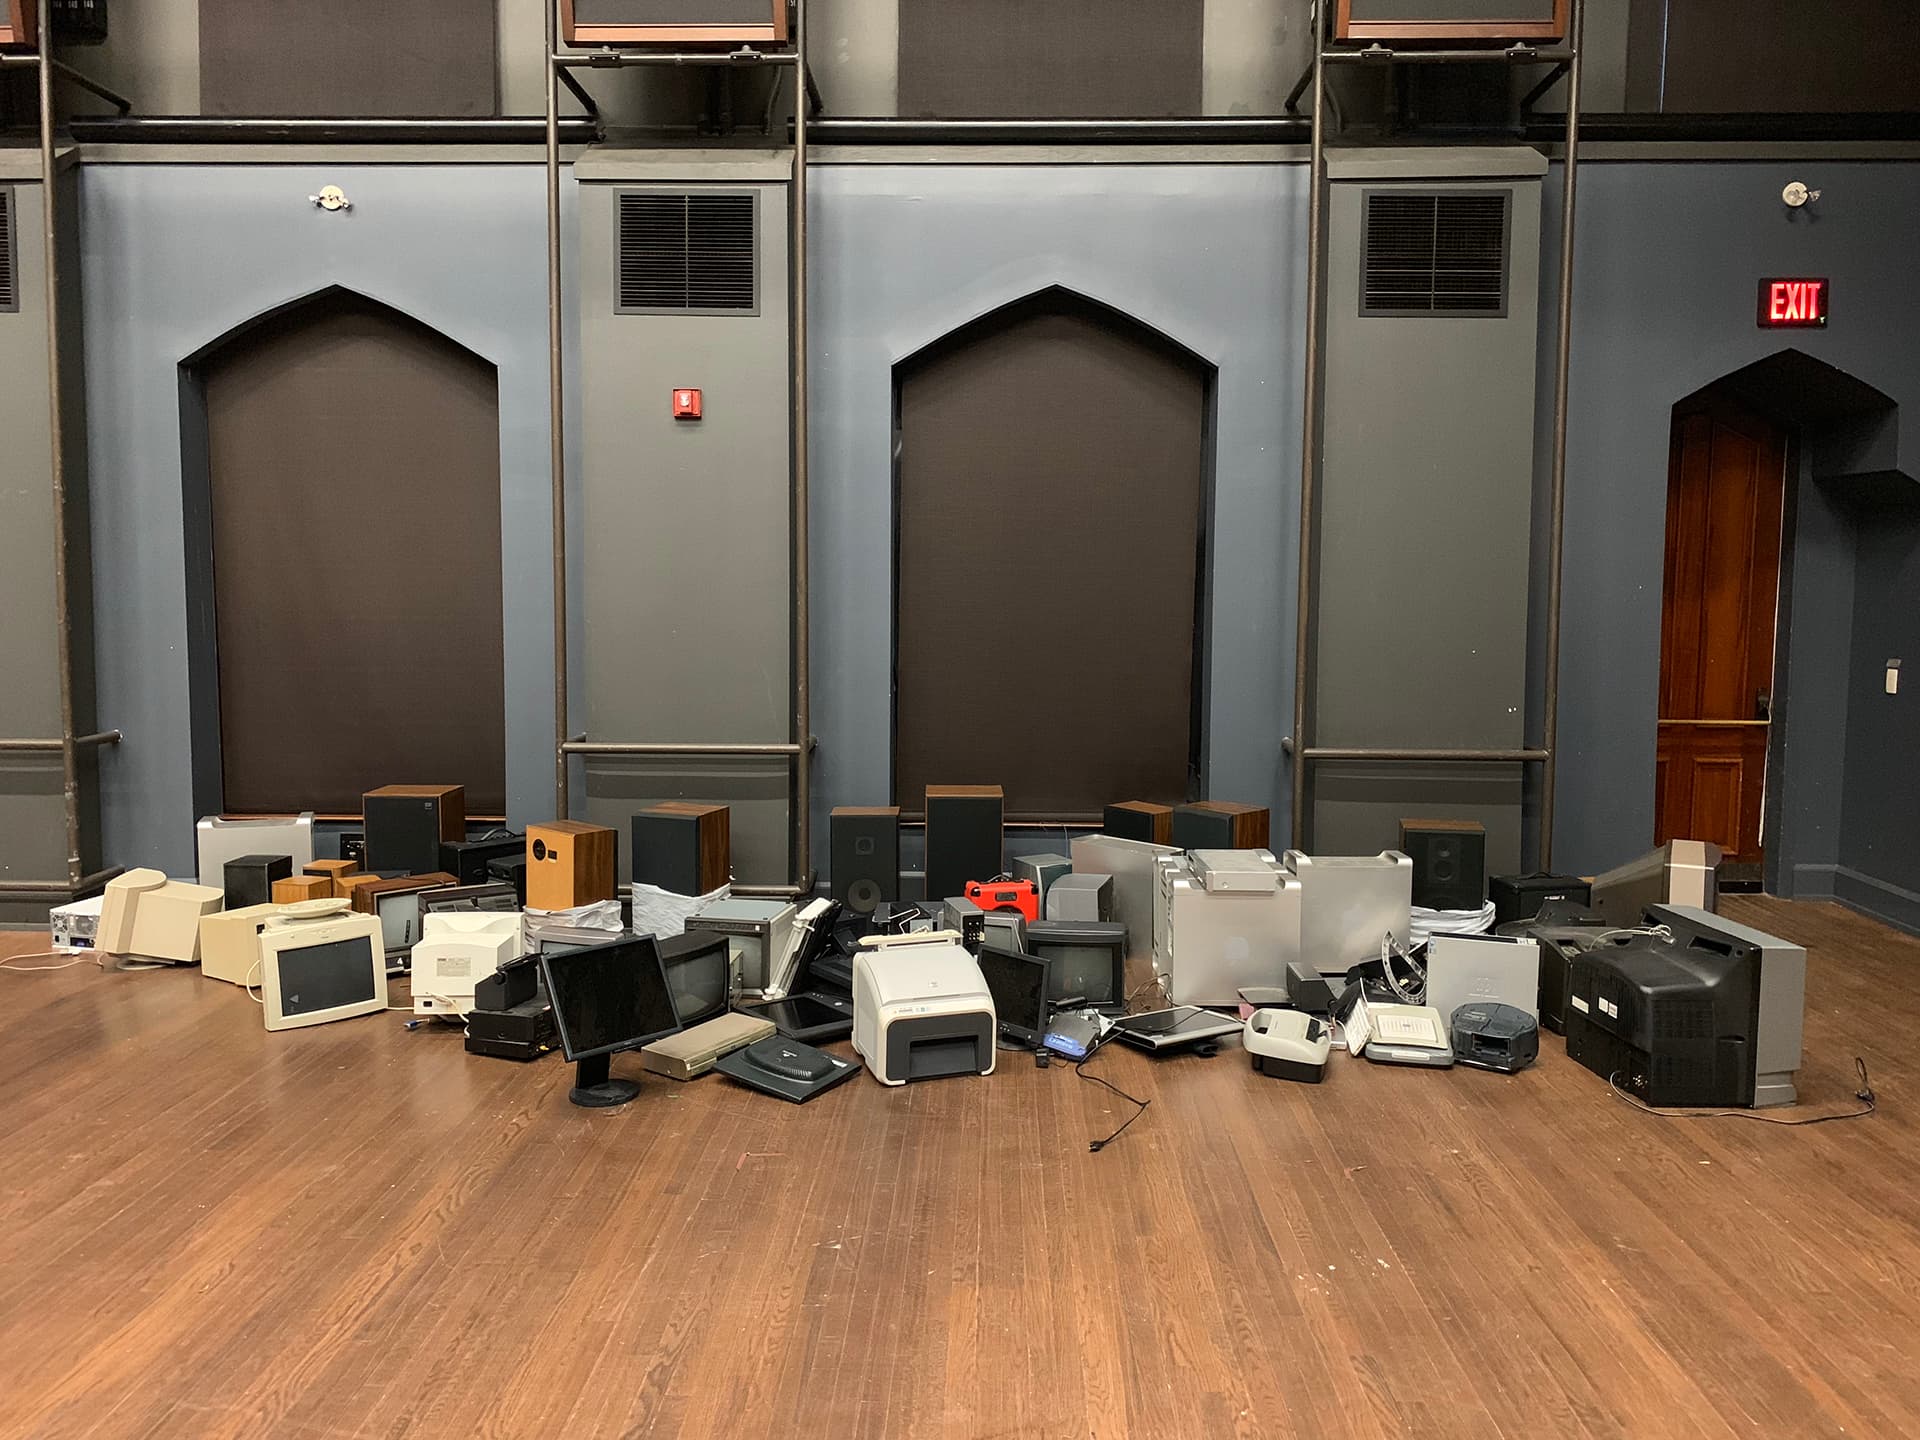 Behind the scenes: full inventory of tech junk